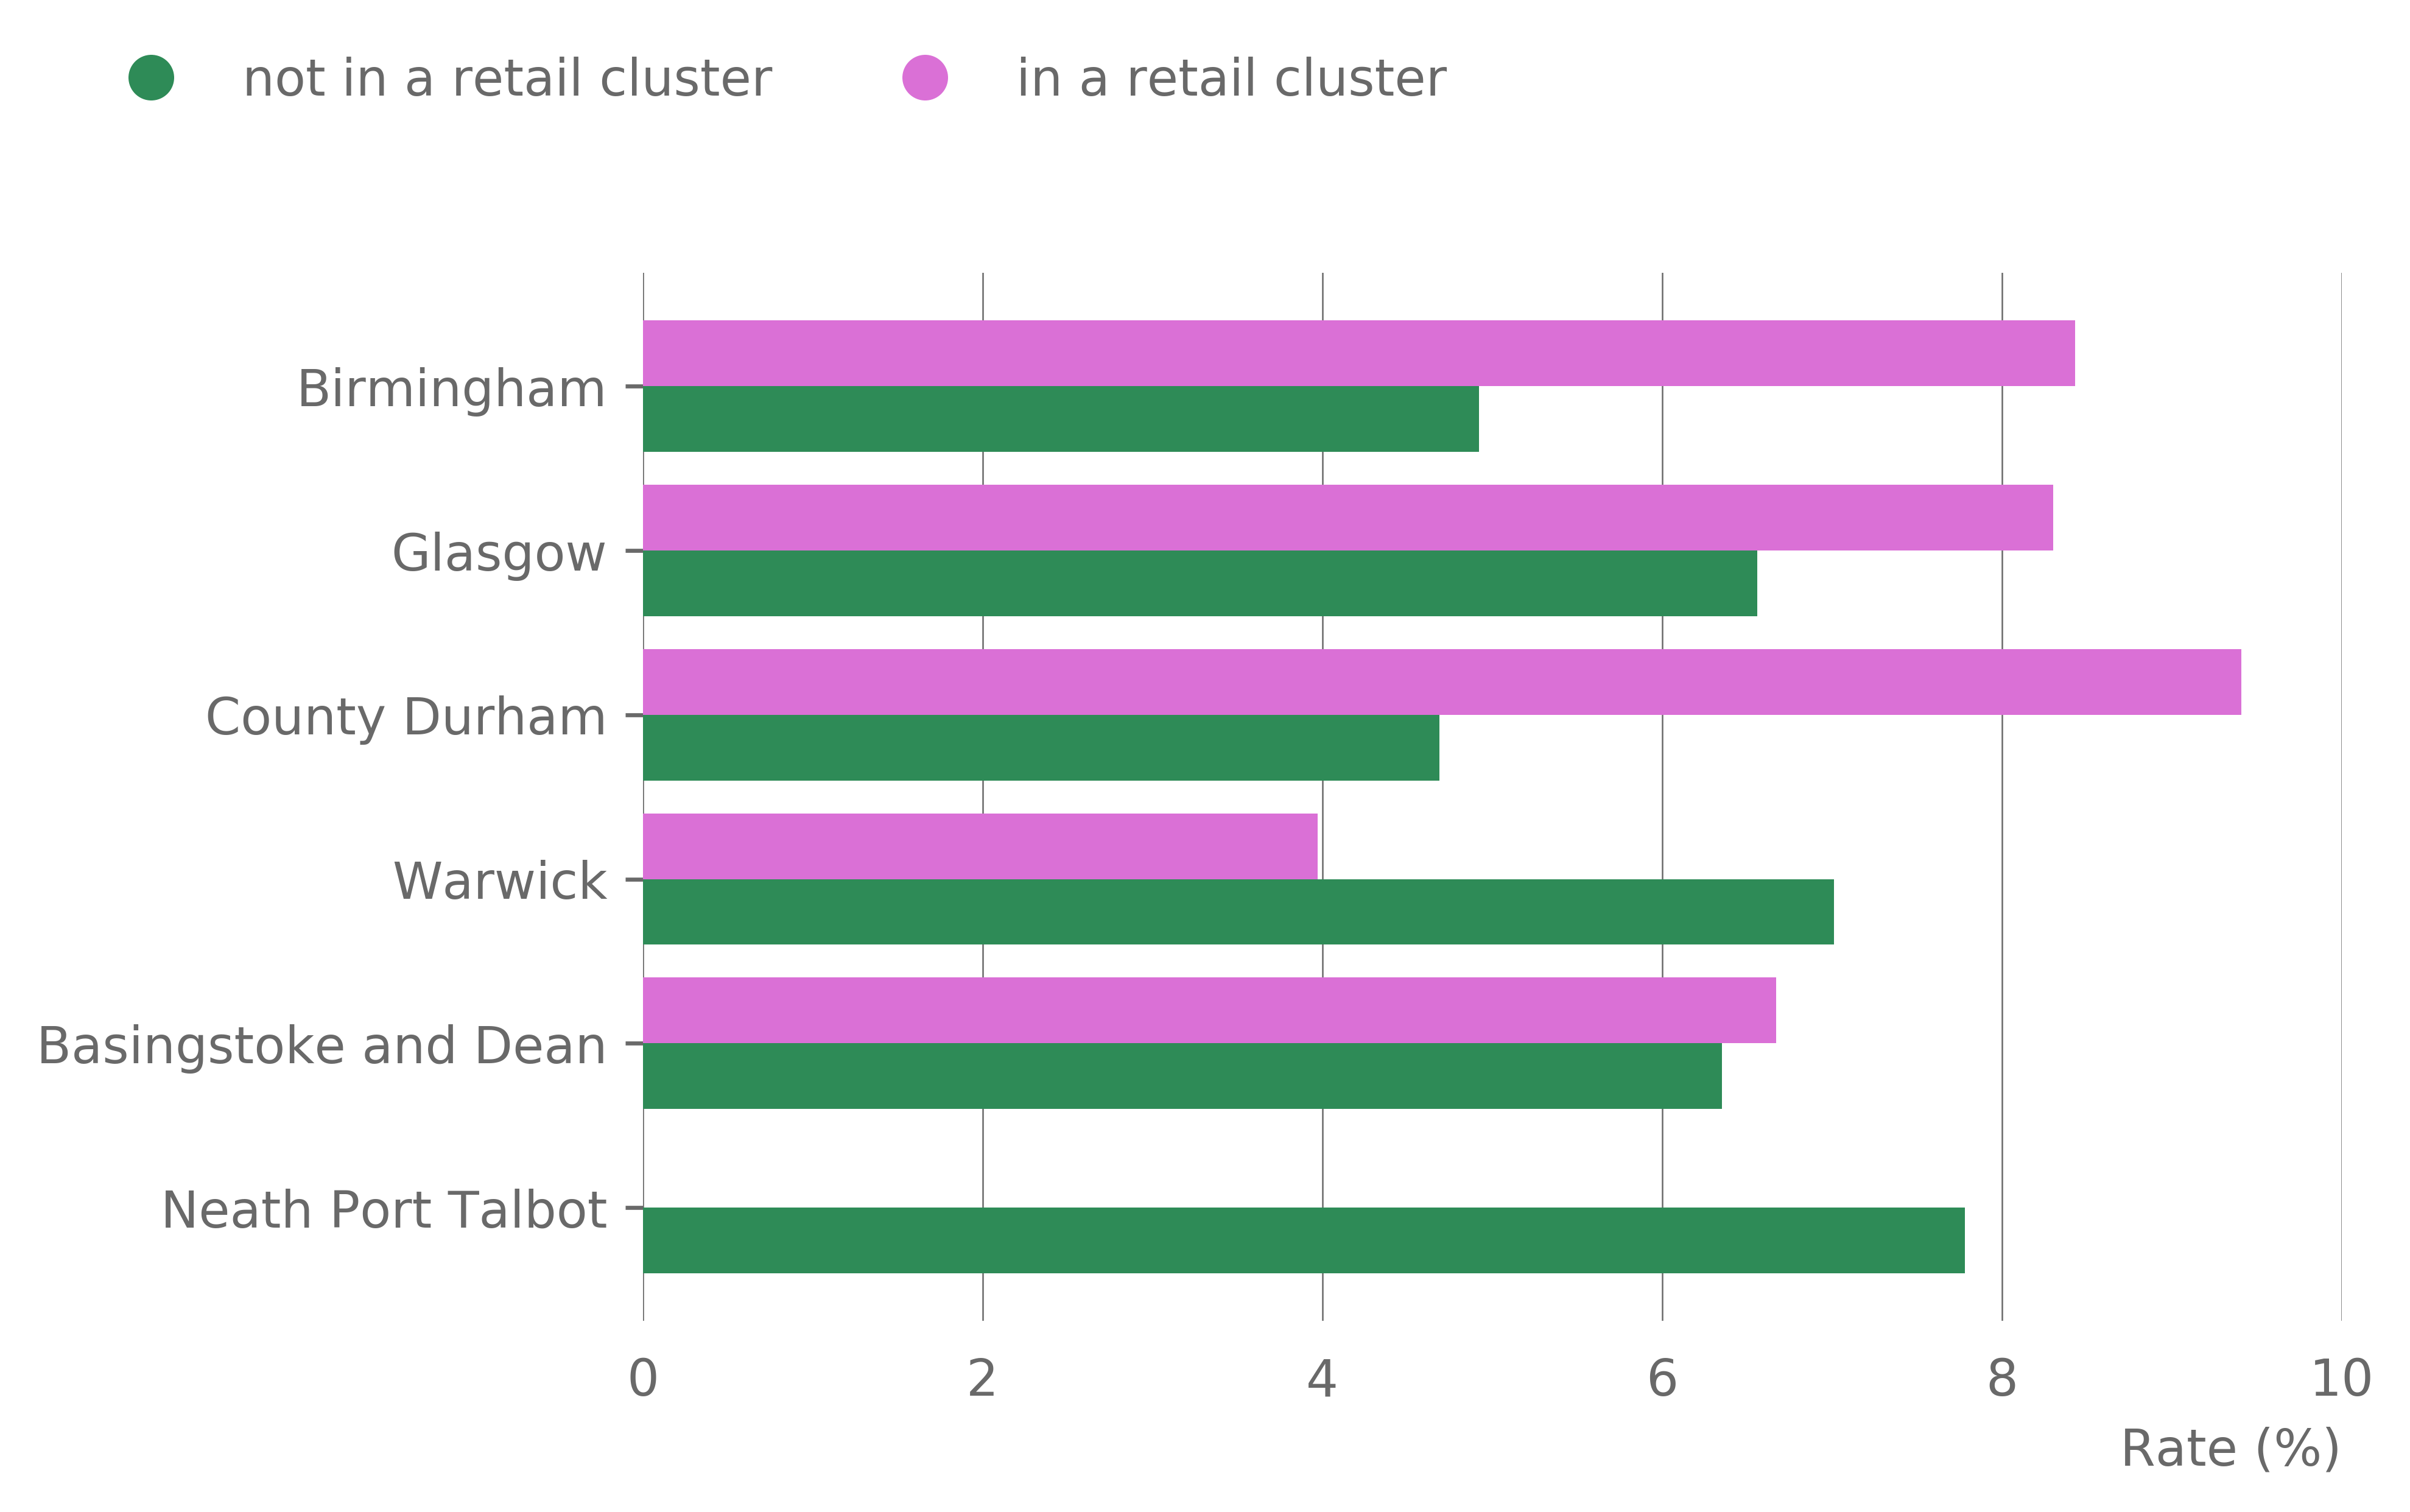 Bar chart showing the rate of high growth companies located in and out of retail clusters for each district. Described under the heading Company location within retail clusters.